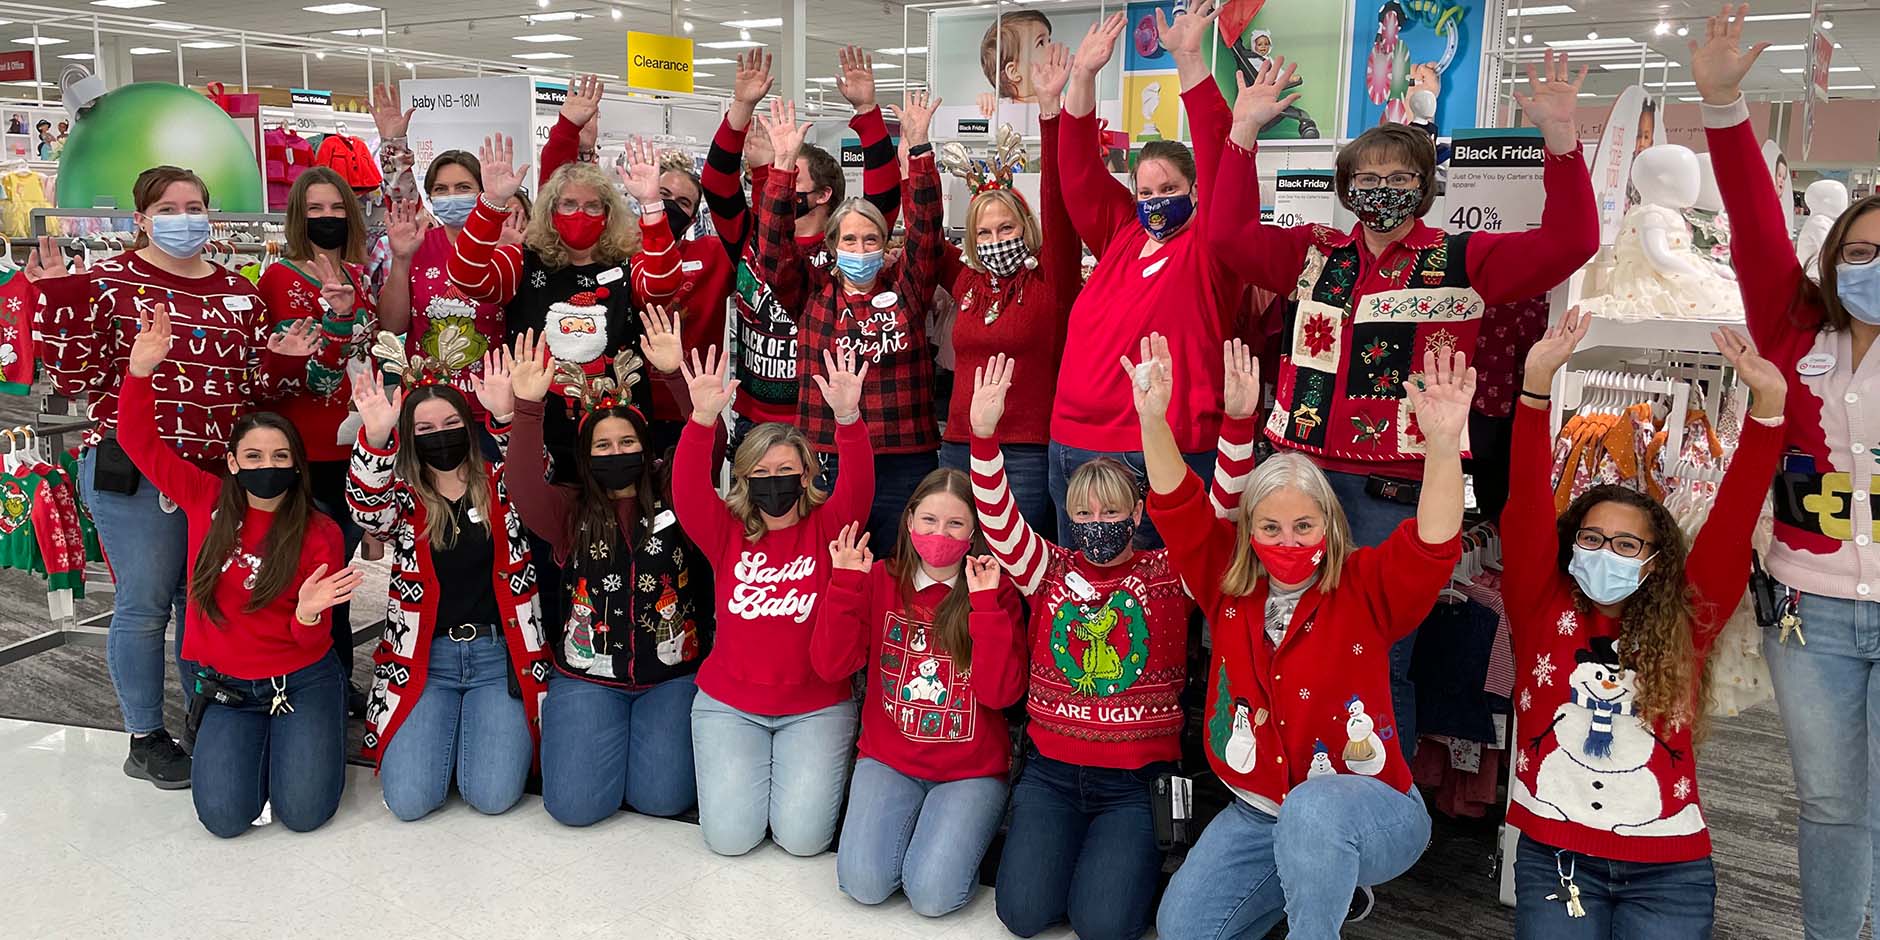 "A large group of team members stand or kneel together with their hands in the air in front of a Target holiday display. They're all wearing festive sweaters and face masks."